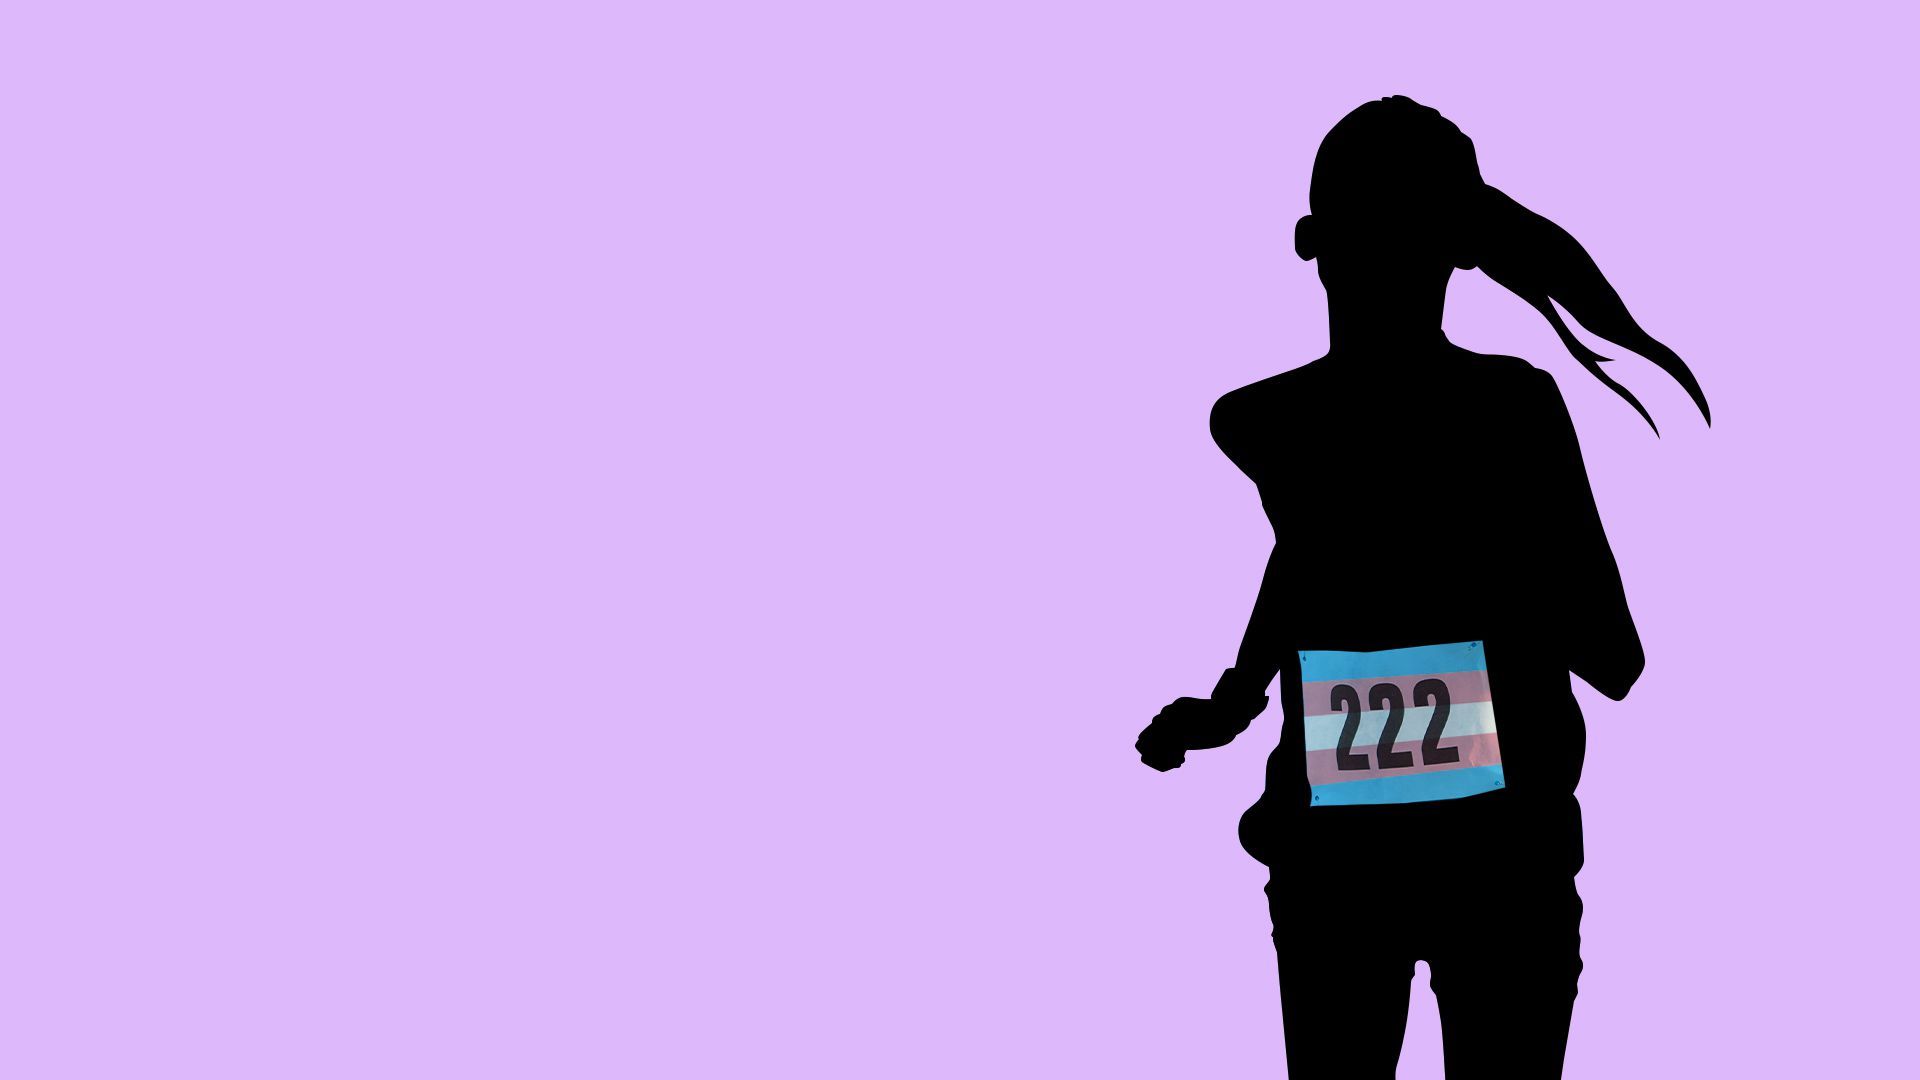 Illustration of a child running with their running number as a trans flag. 